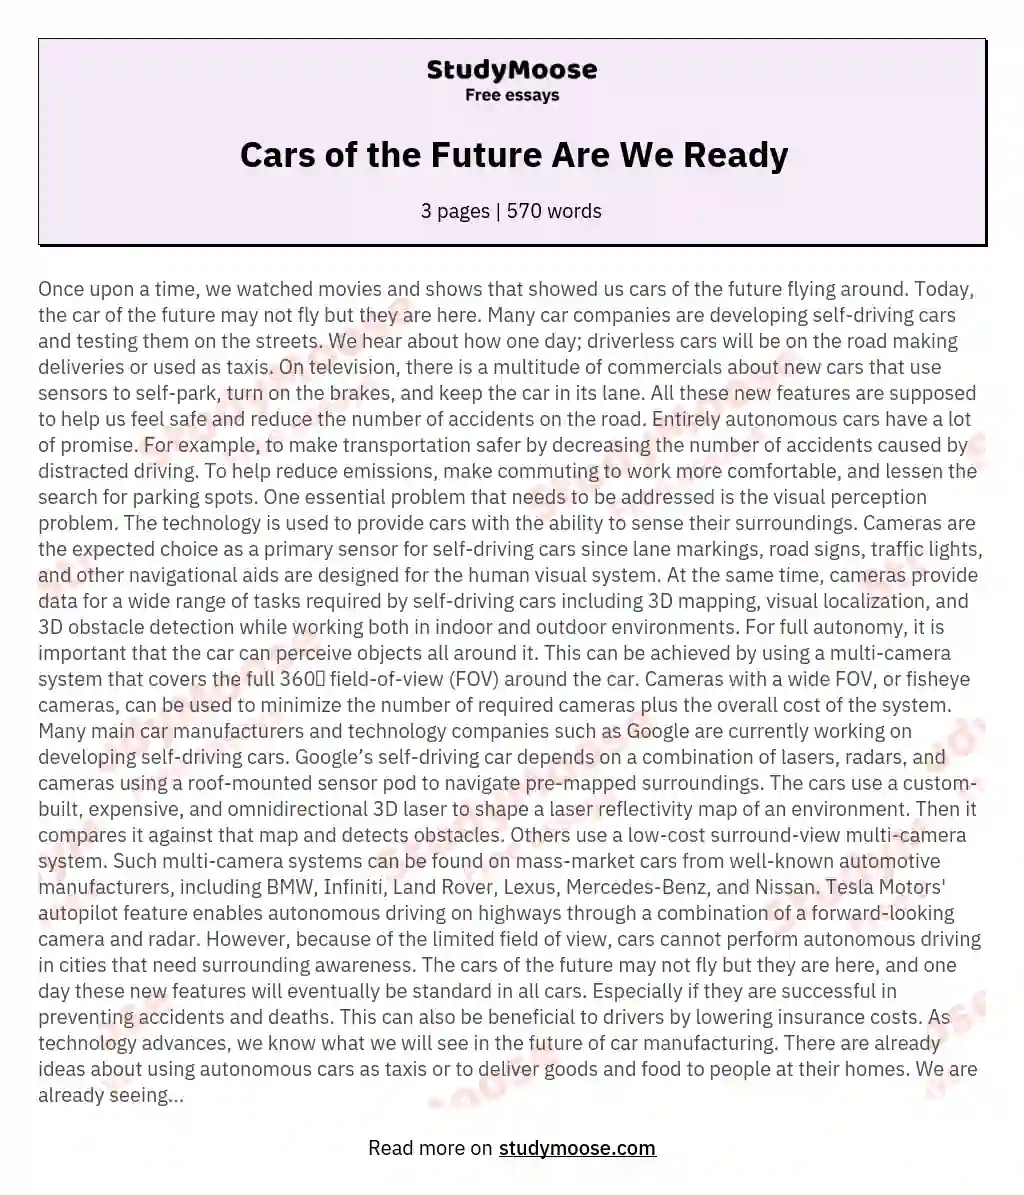 Cars of the Future Are We Ready essay